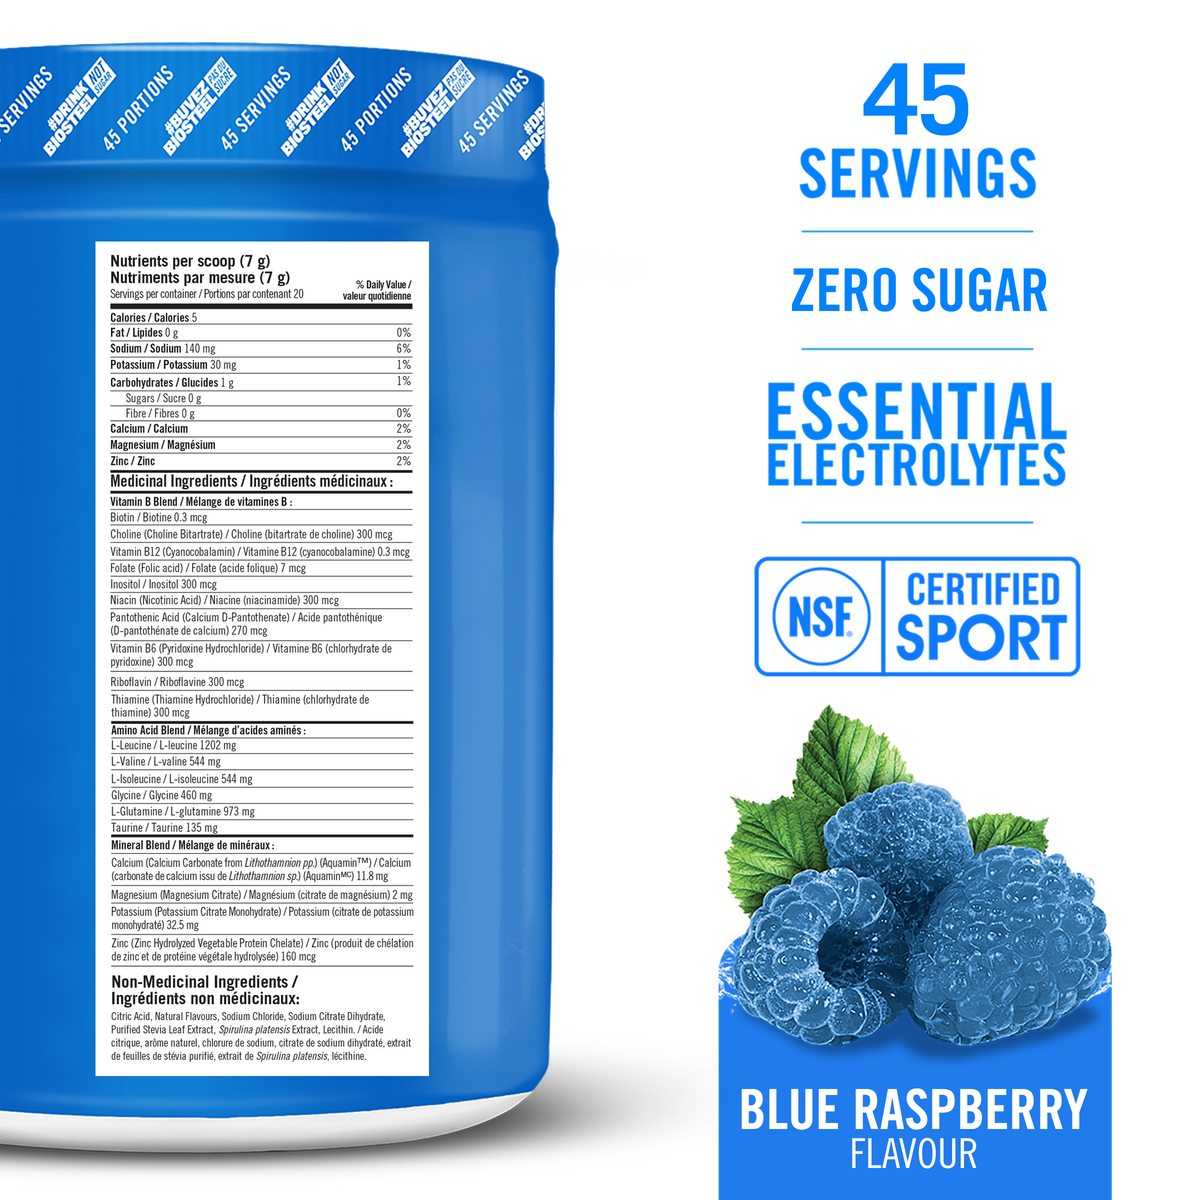 Hydration Mix / Blue Raspberry - 45 Servings - by BioSteel Sports Nutrition |ProCare Outlet|